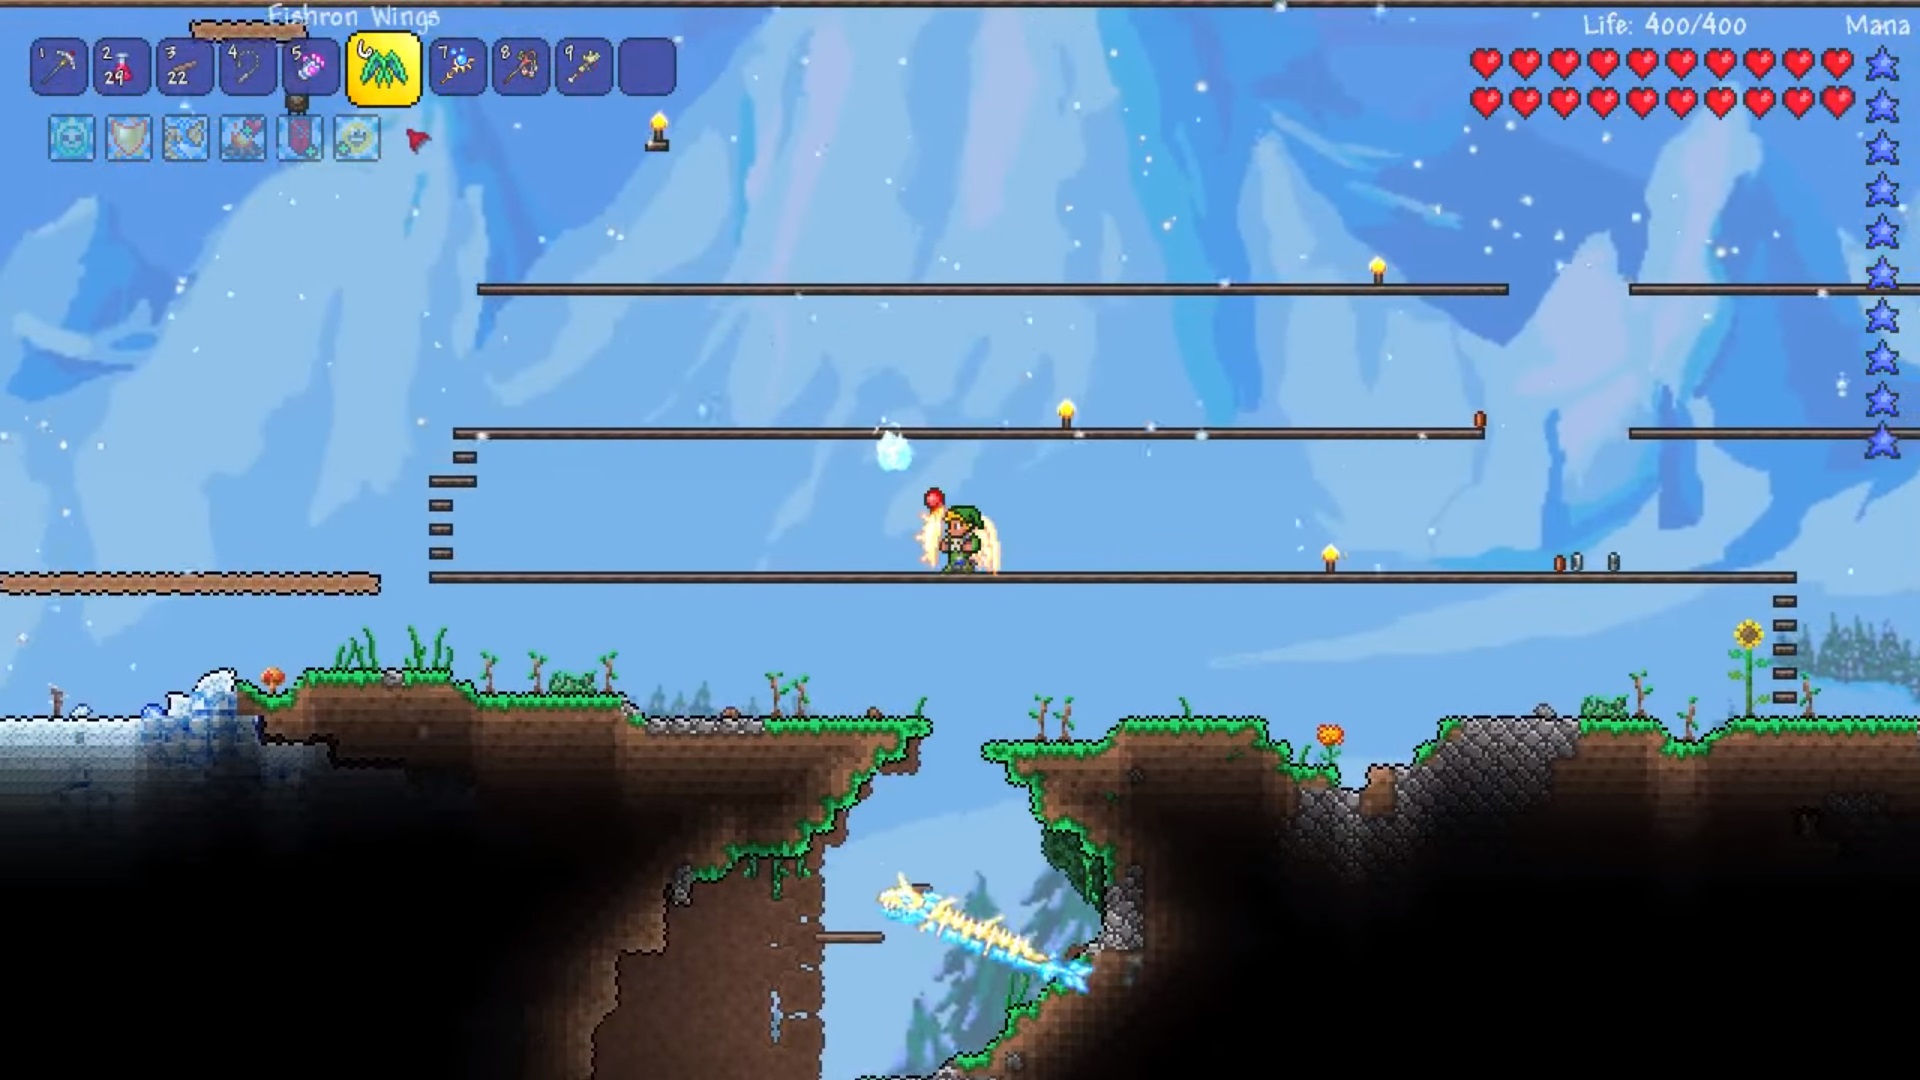 Solar Terraria Wings in Action